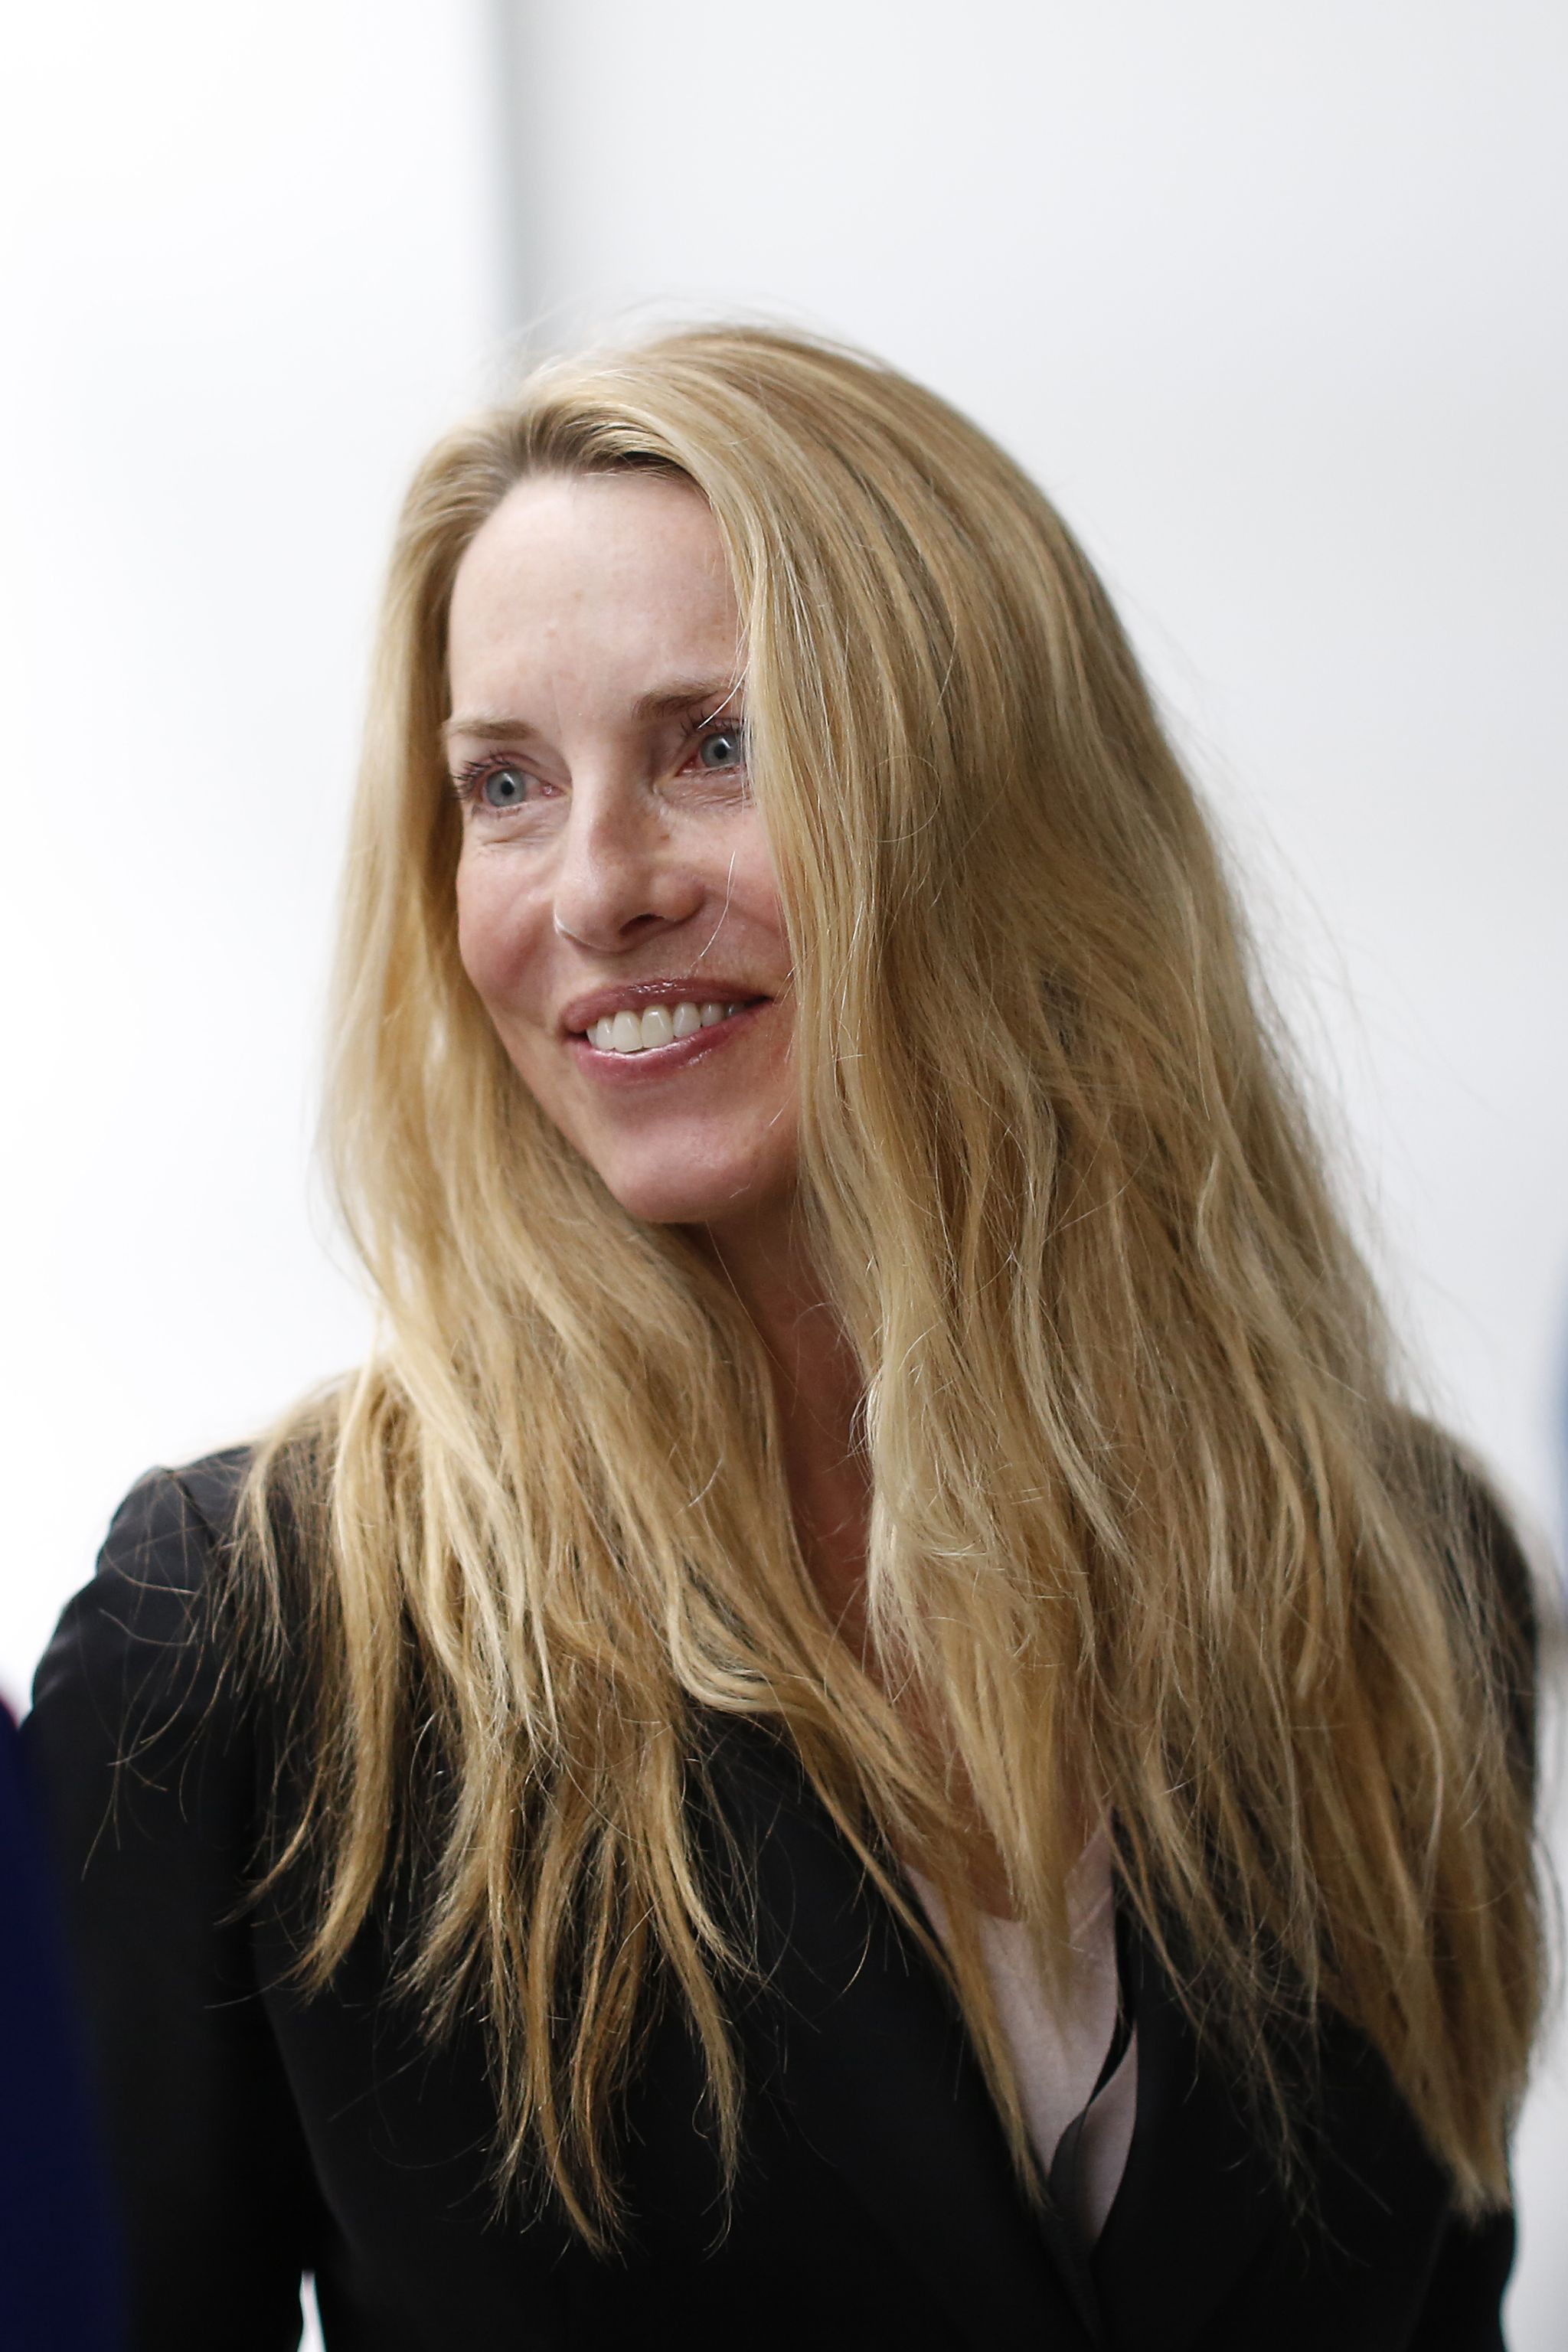 san francisco, ca   march 9  laurene powell jobs, widow of late apple founder and ceo steve jobs, is seen among the crowd after an apple special event at the yerba buena center for the arts on march 9, 2015 in san francisco, california apple inc announced the new macbook as well as more details on the much anticipated apple watch, the tech giants entry into the rapidly growing wearable technology segment as well photo by stephen lamgetty images